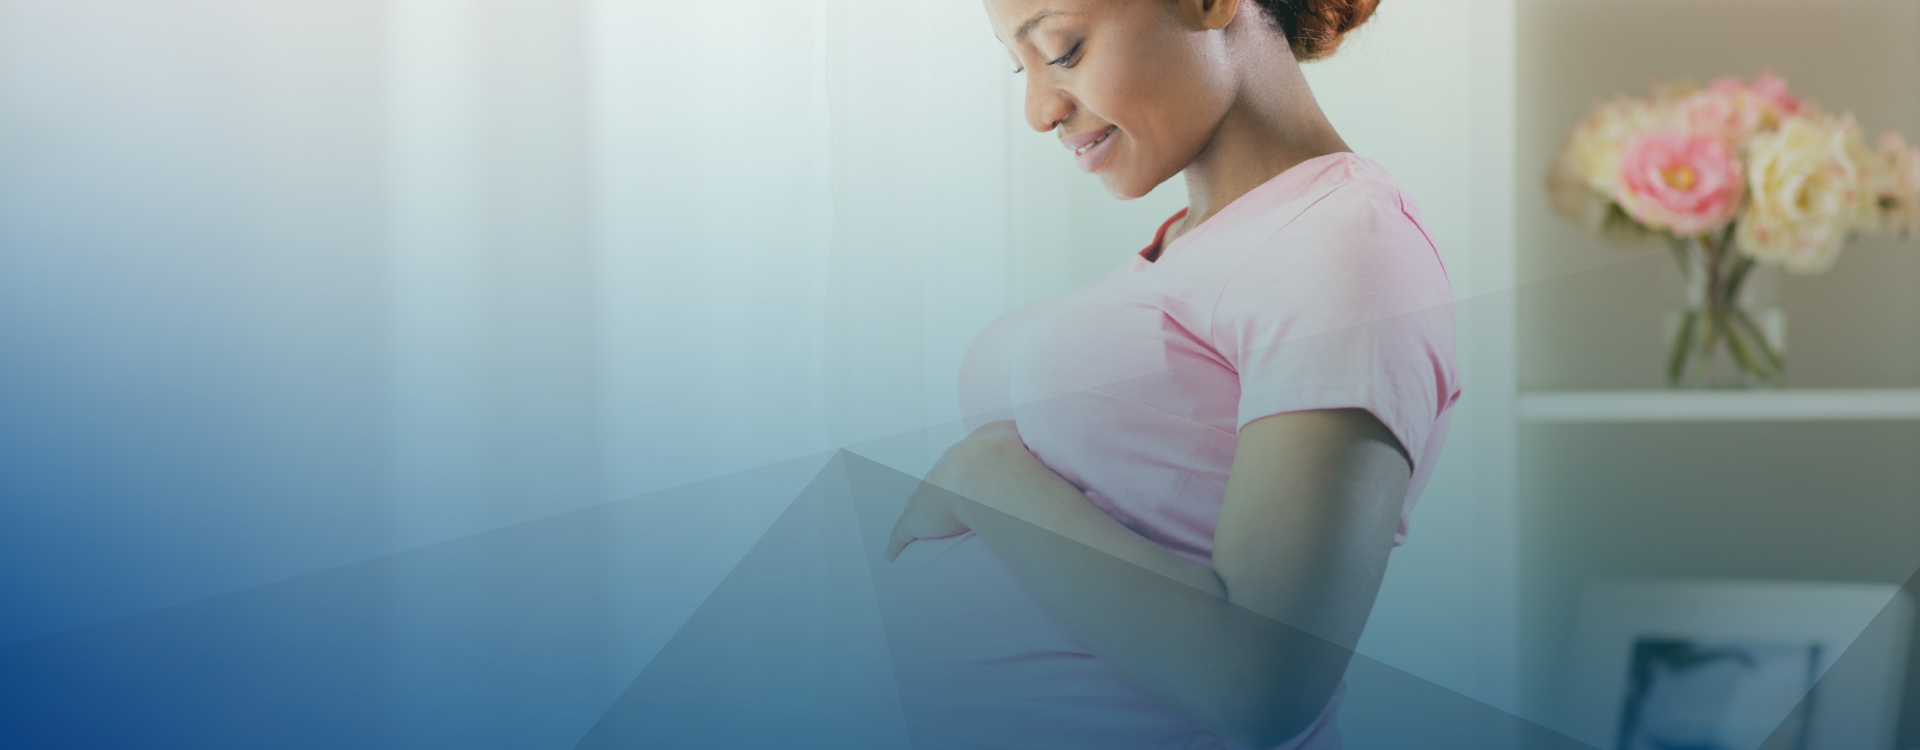 Ask the Doctor: How Does COVID-19 Impact My Pregnancy?  